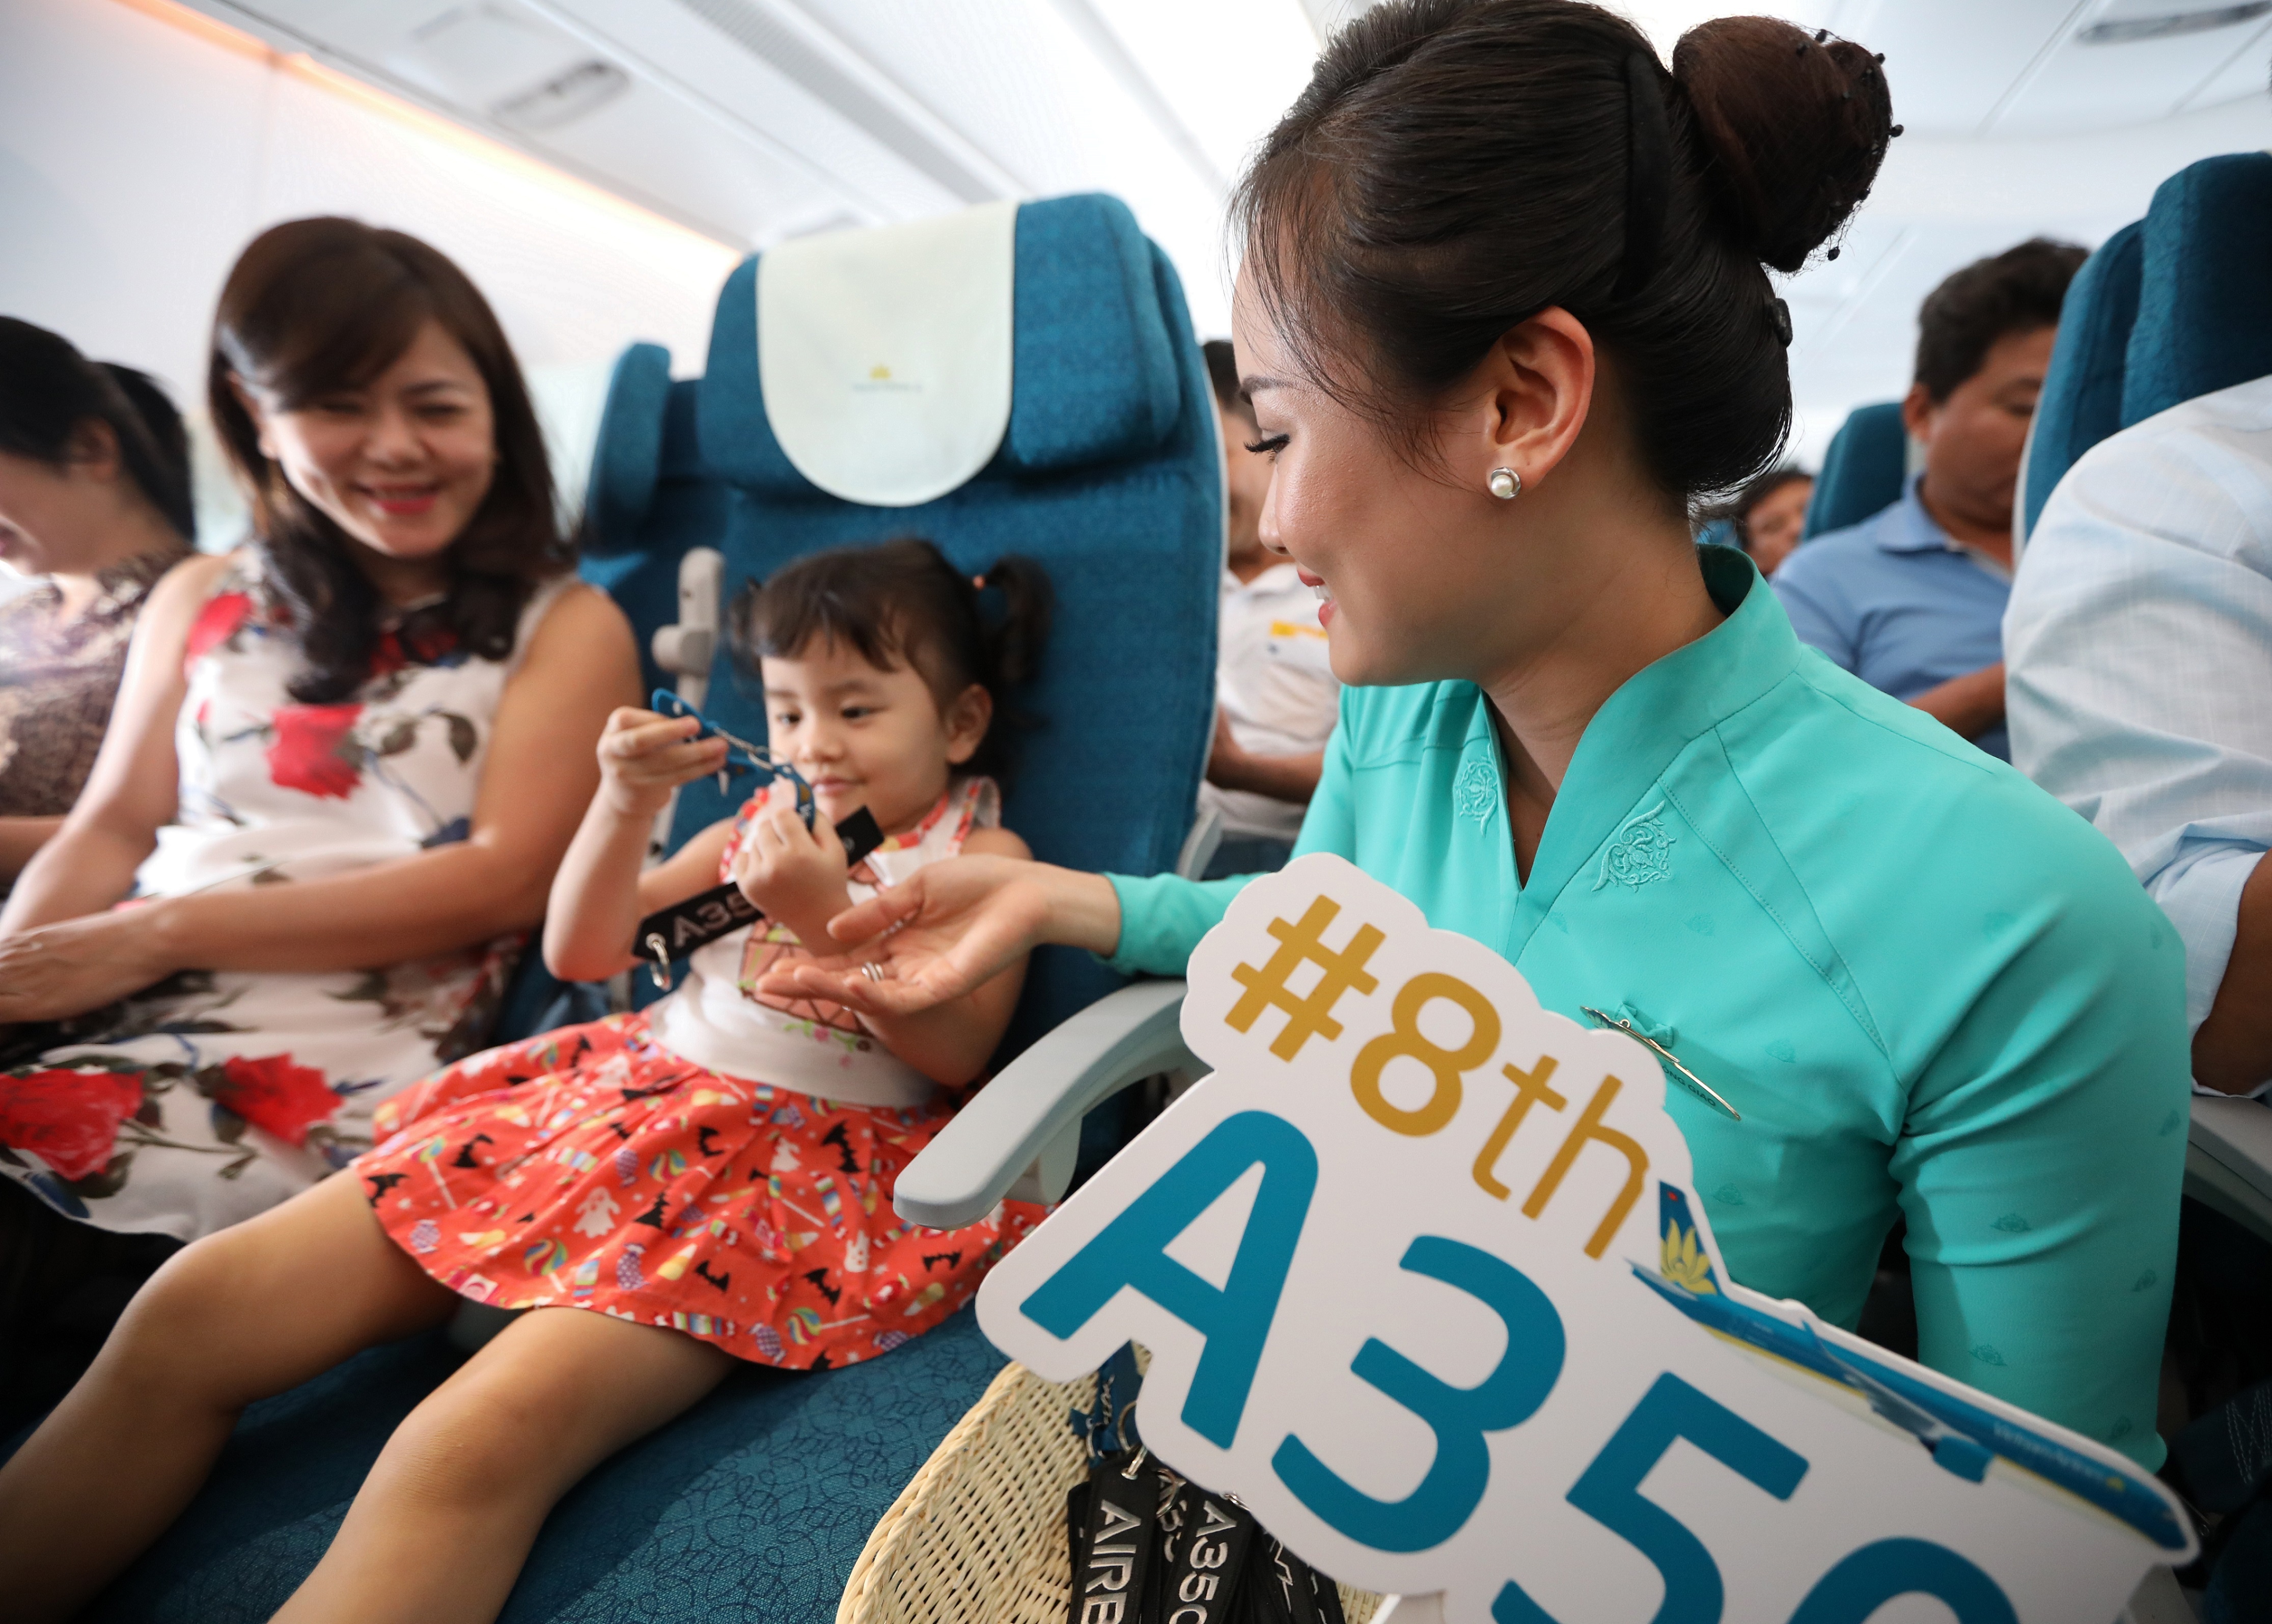 hanh khach Vietnam Airlines di may bay Airbus A350 anh 7